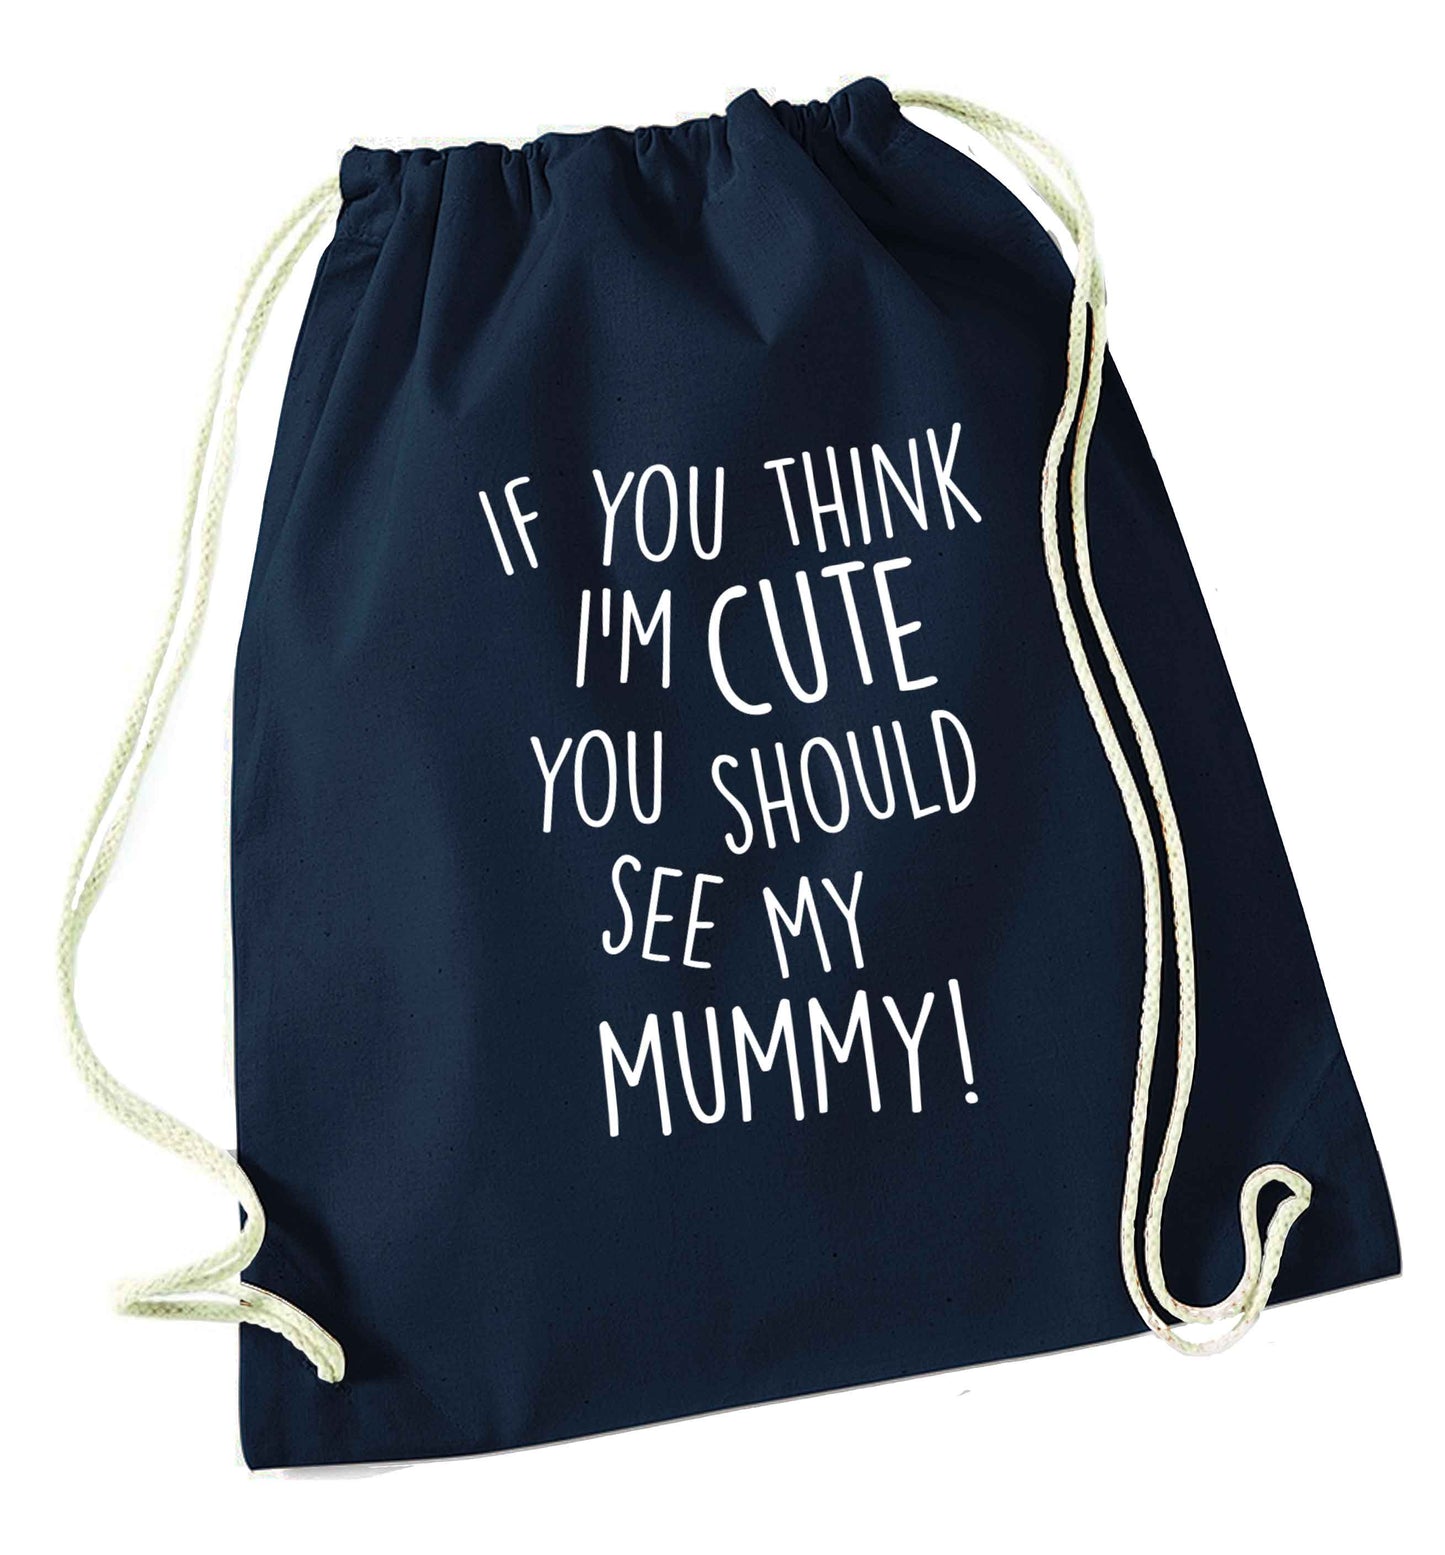 If you think I'm cute you should see my mummy navy drawstring bag